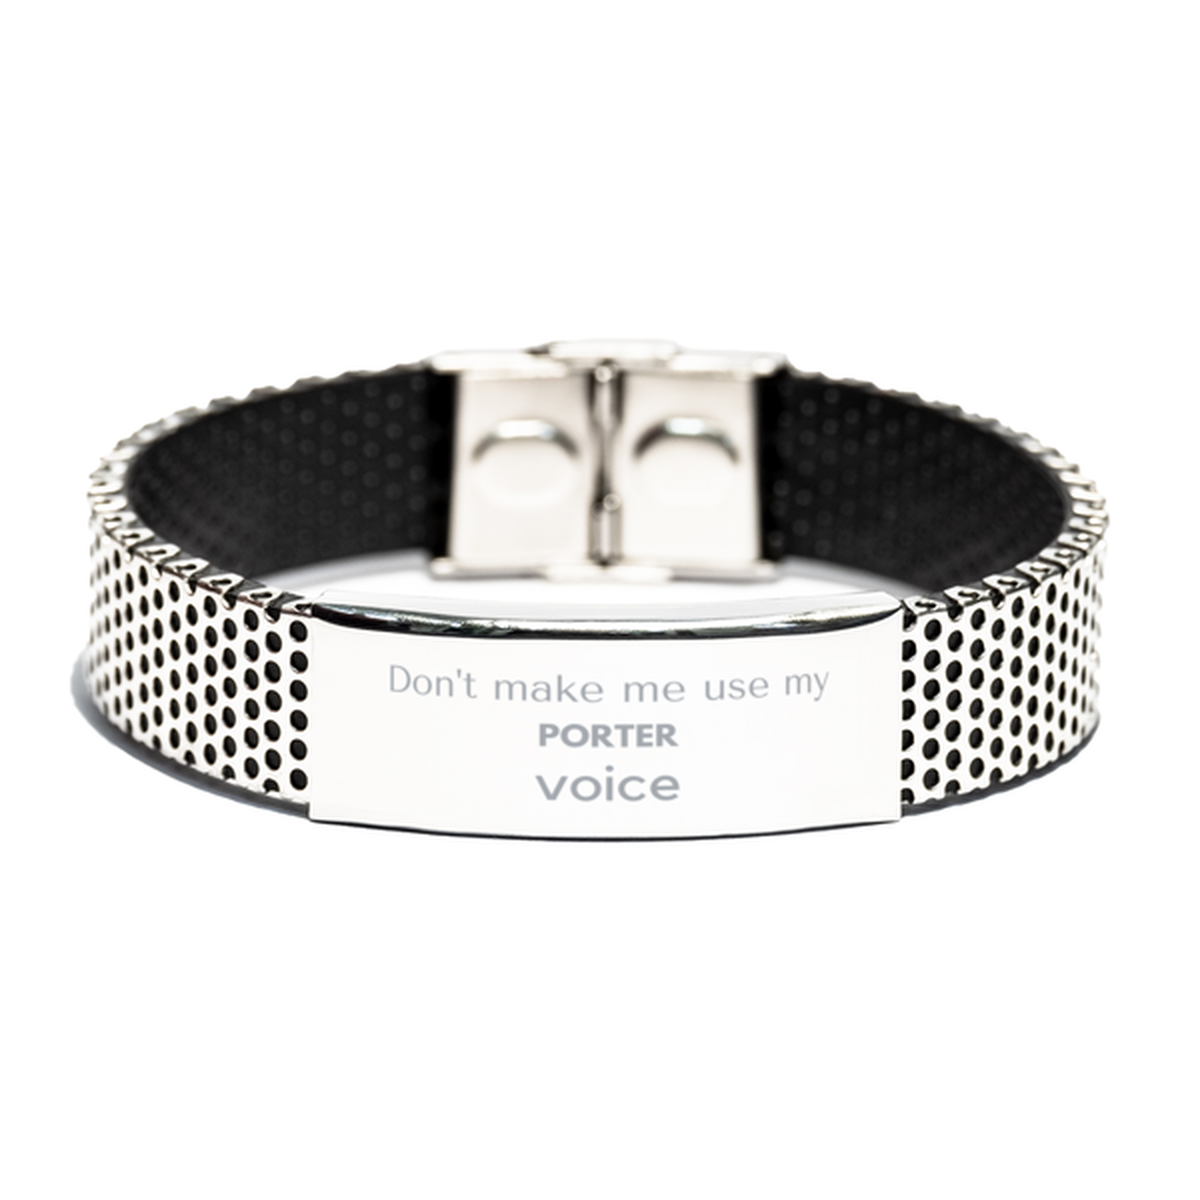 Don't make me use my Porter voice, Sarcasm Porter Gifts, Christmas Porter Stainless Steel Bracelet Birthday Unique Gifts For Porter Coworkers, Men, Women, Colleague, Friends